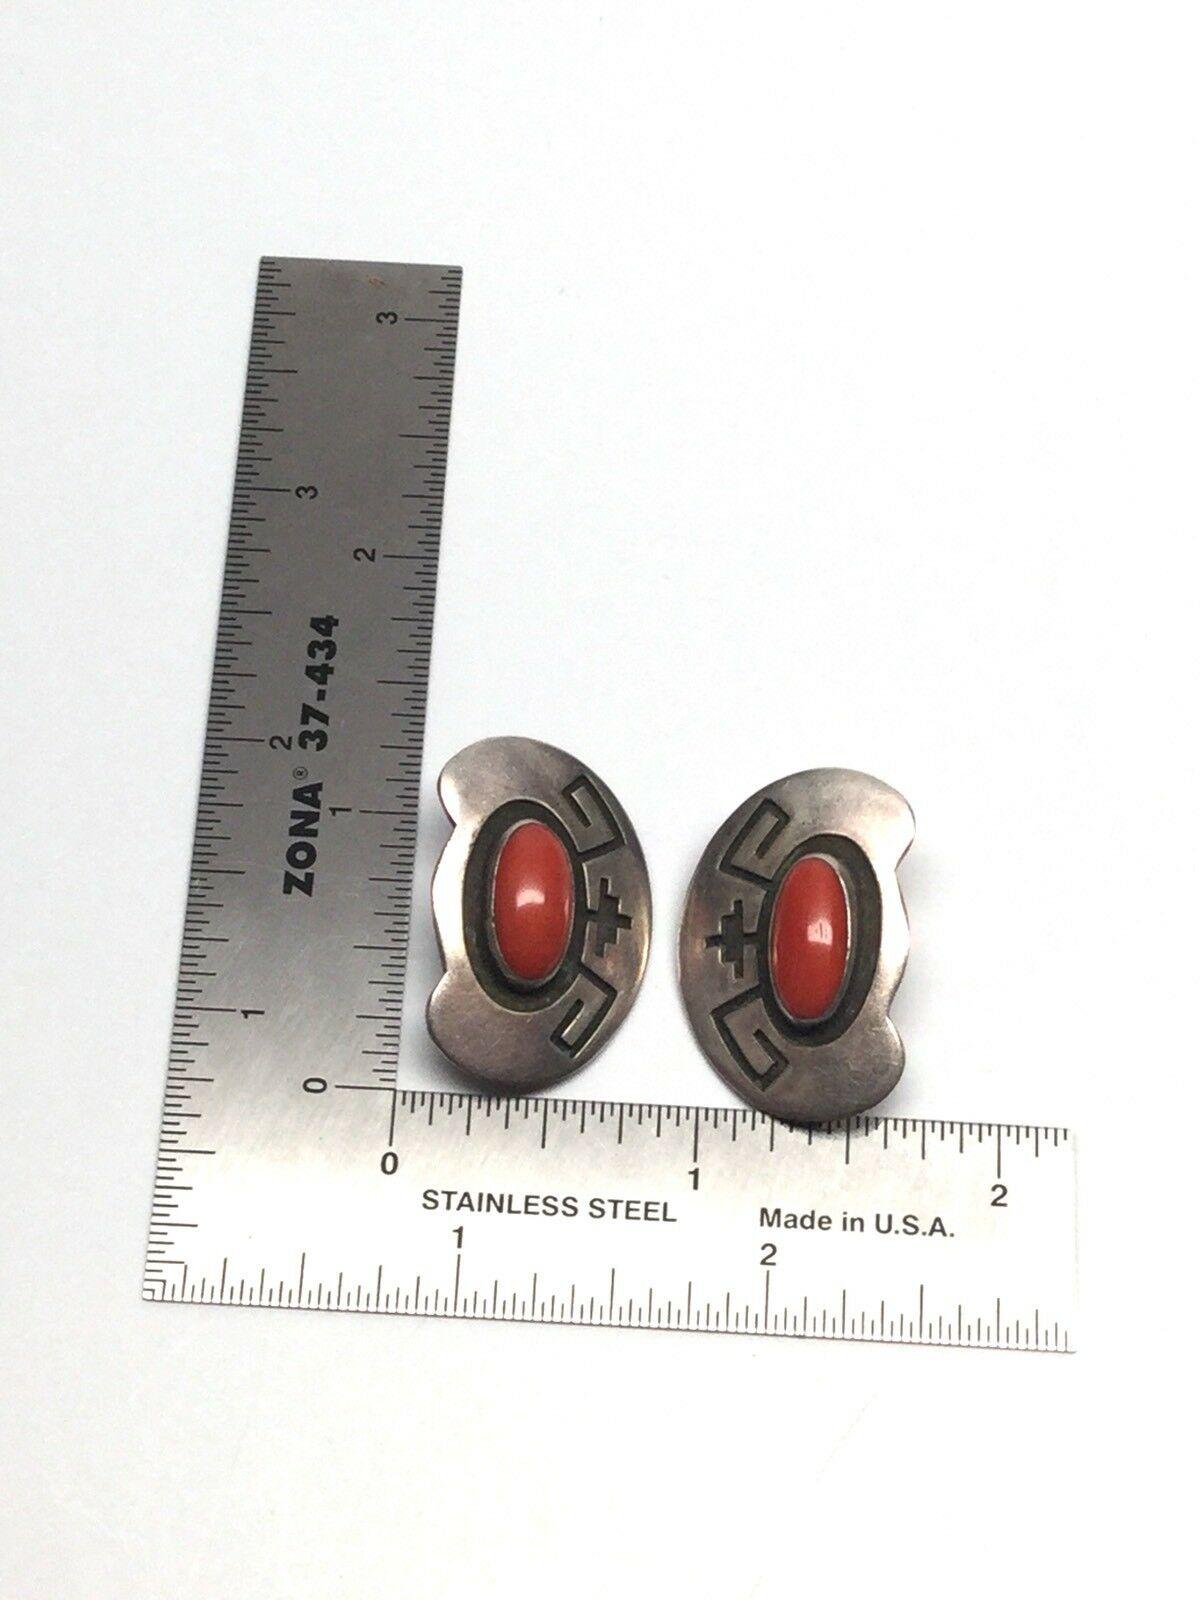 Everett and Mary Teller Navajo Sterling Silver Coral Clip Earrings

These are a fabulous pair of sterling silver coral earrings designed by Everett and Mary Teller.  These sterling silver earrings are the perfect size and shape.

Measurements: 